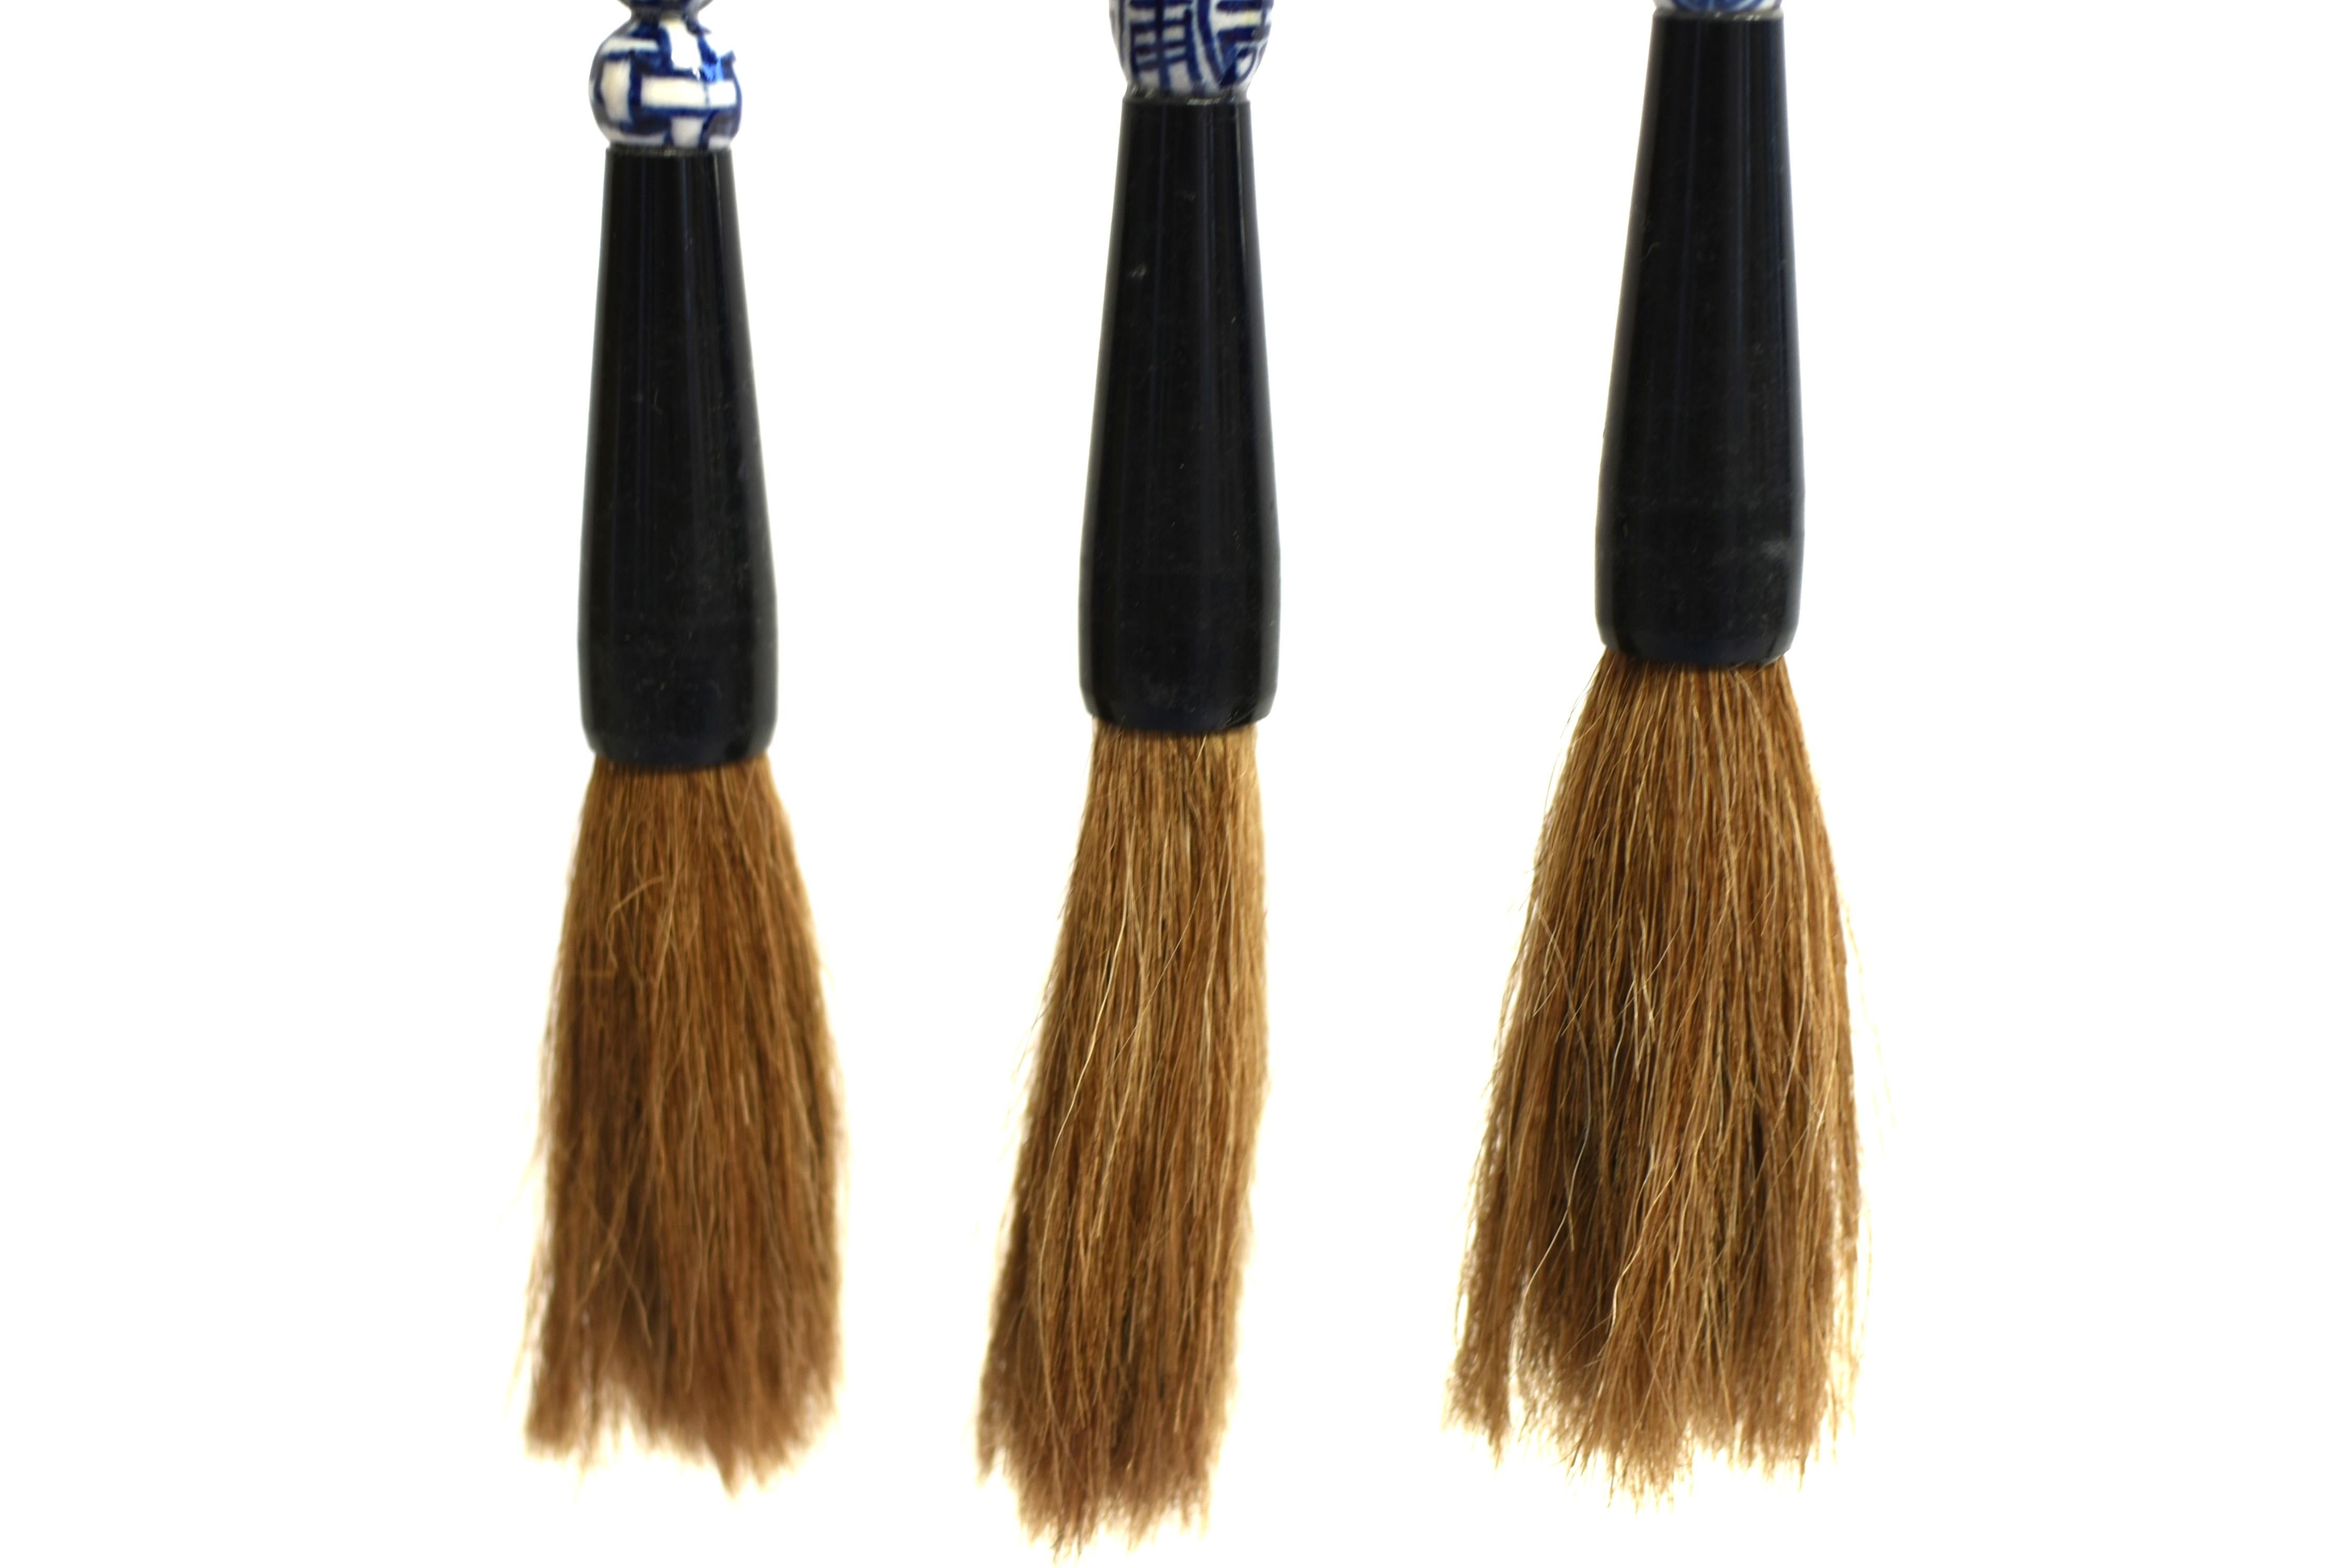 Set of 3 Calligraphy Brushes Blue and White In Good Condition For Sale In Somis, CA